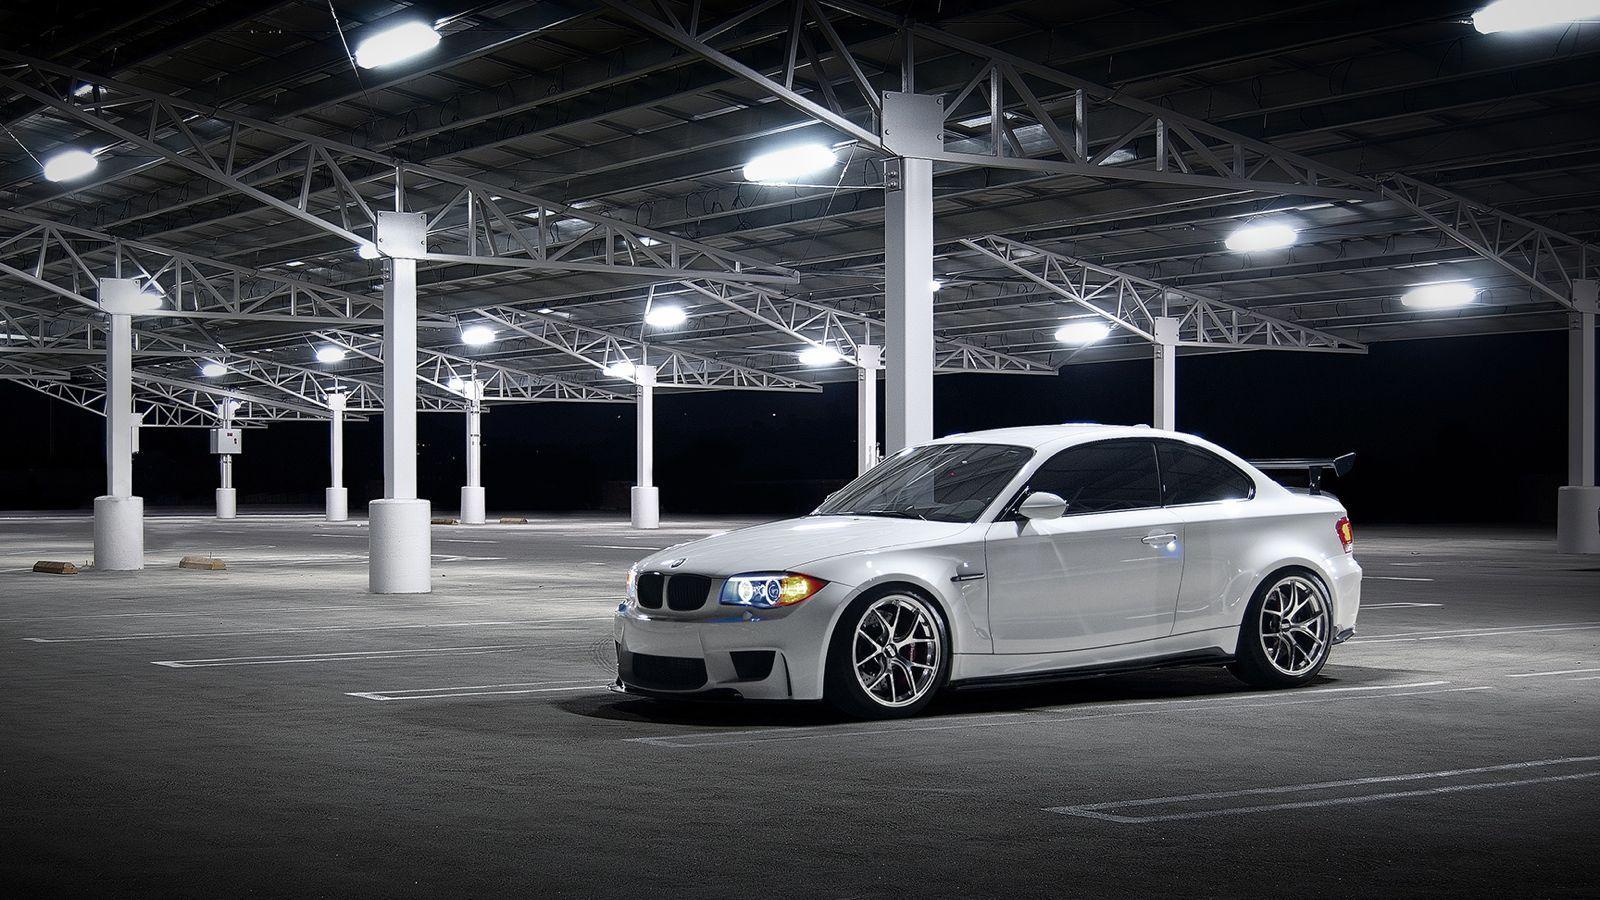 Your Ridiculously Cool BMW 1M Wallpaper Is Here. Bmw wallpaper, Bmw cars, Bmw